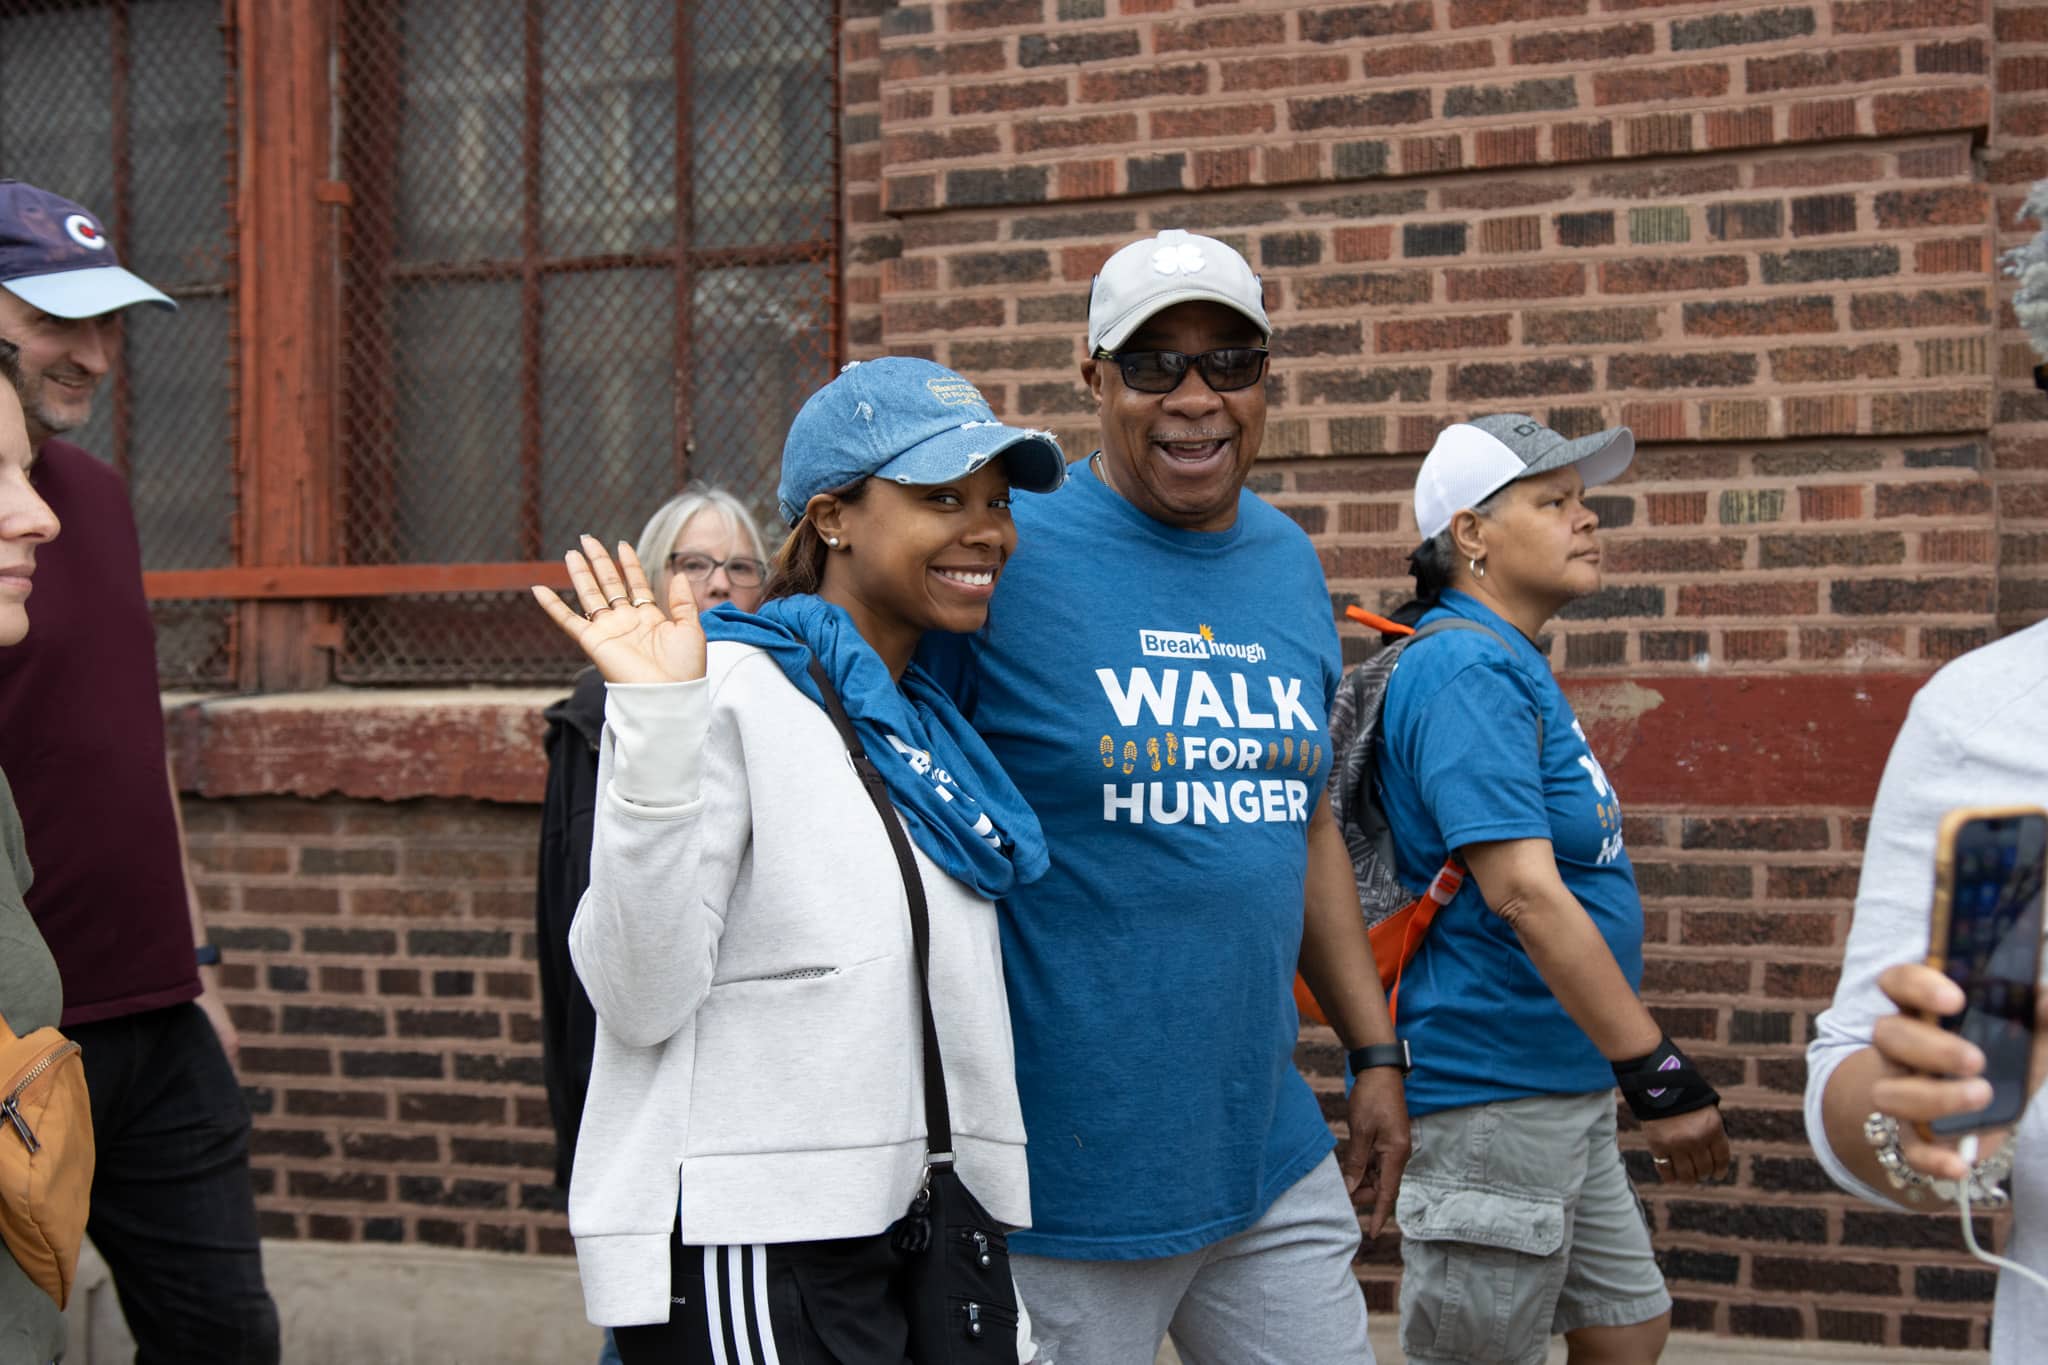 More Than 600 People Participate in Walk for Hunger 1